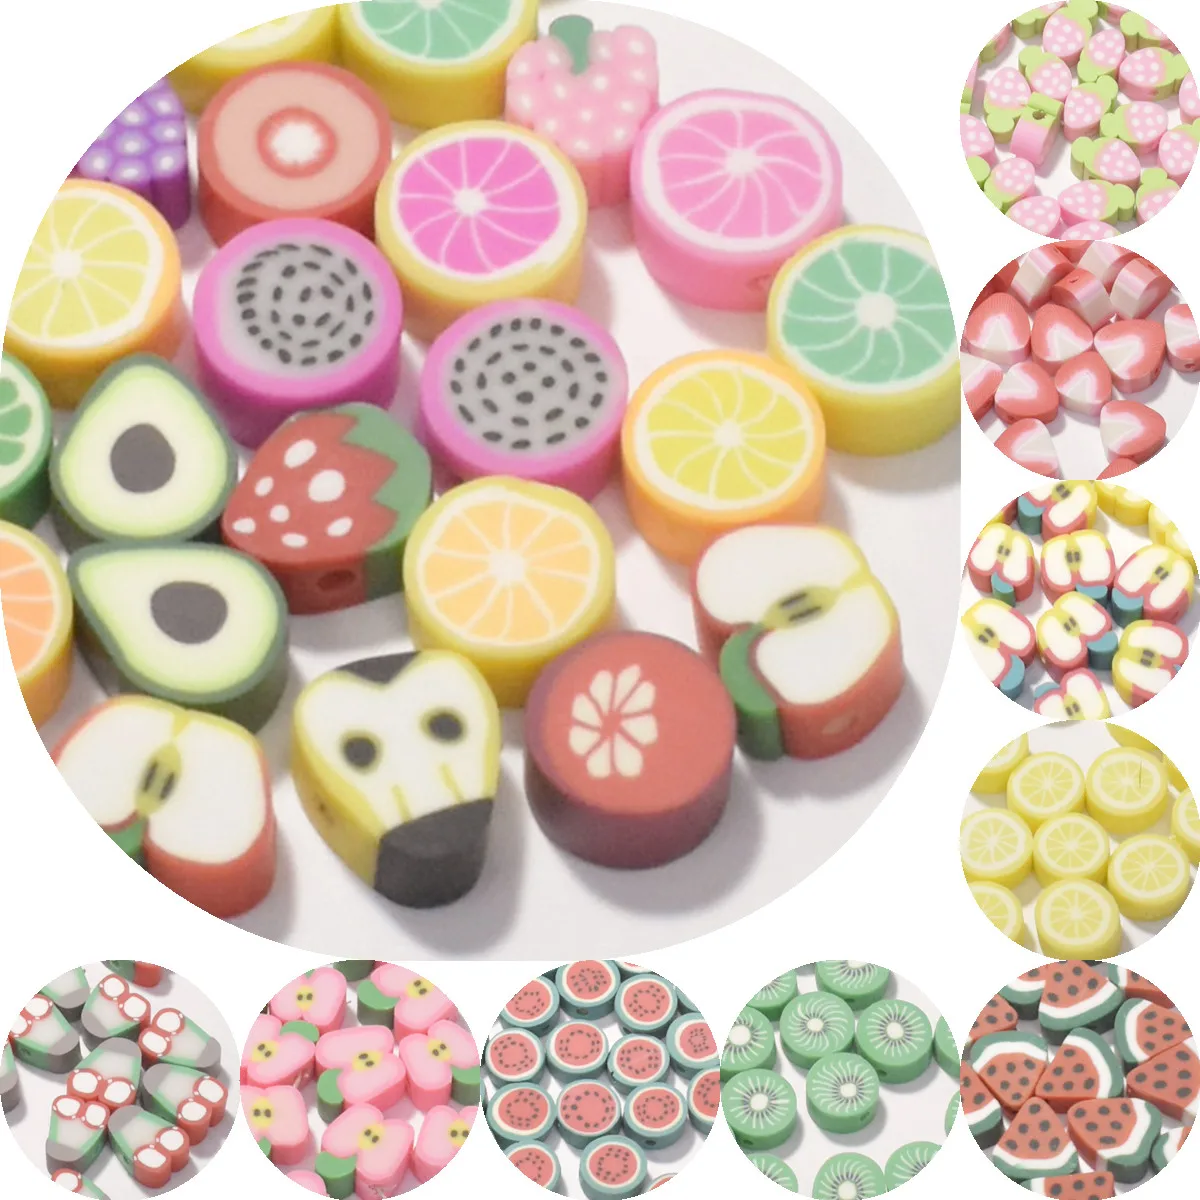 

DIY10mm30/50/100pcs Mix Fruit Clay Beads Polymer Clay Lemon Grape Apple Strawberry Spacer Beads For Making Bracelet Necklace